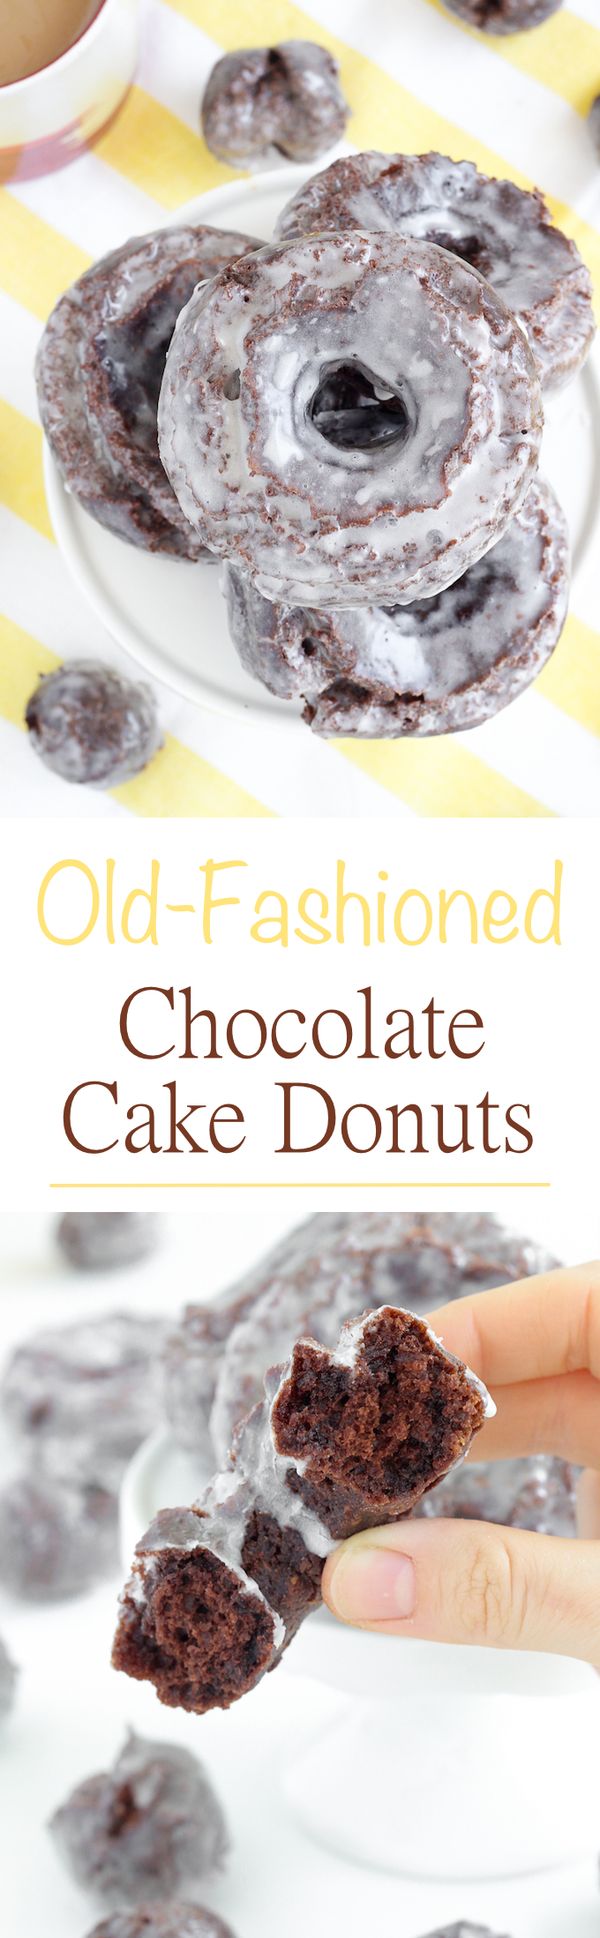 Old Fashioned Chocolate Cake Donuts